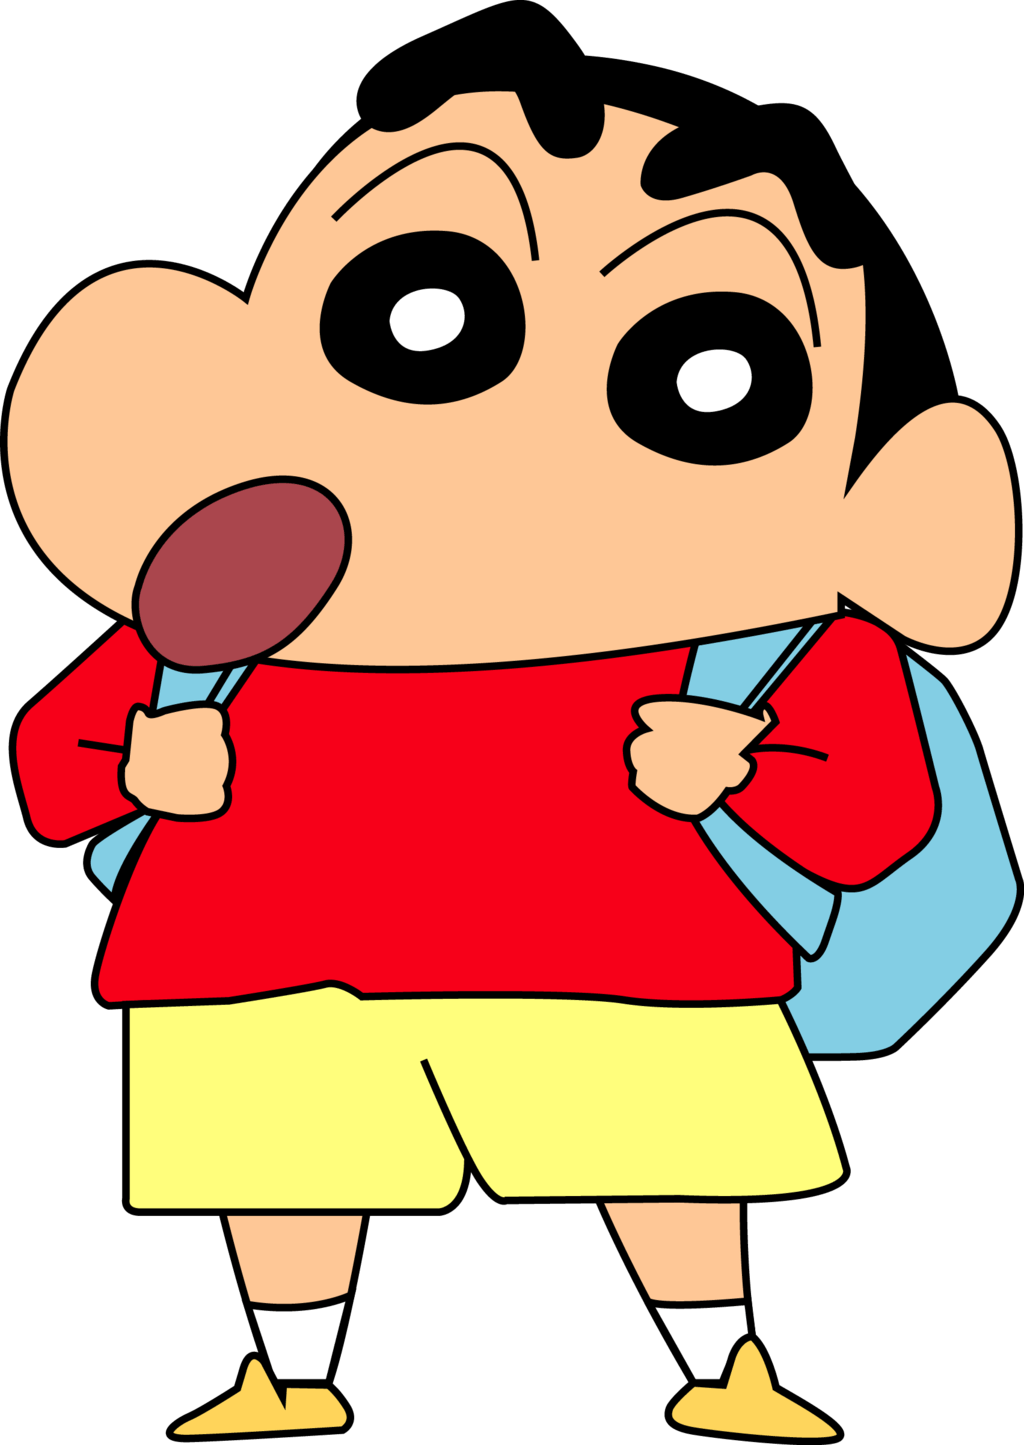 Shinchan Wallpapers 59 pictures